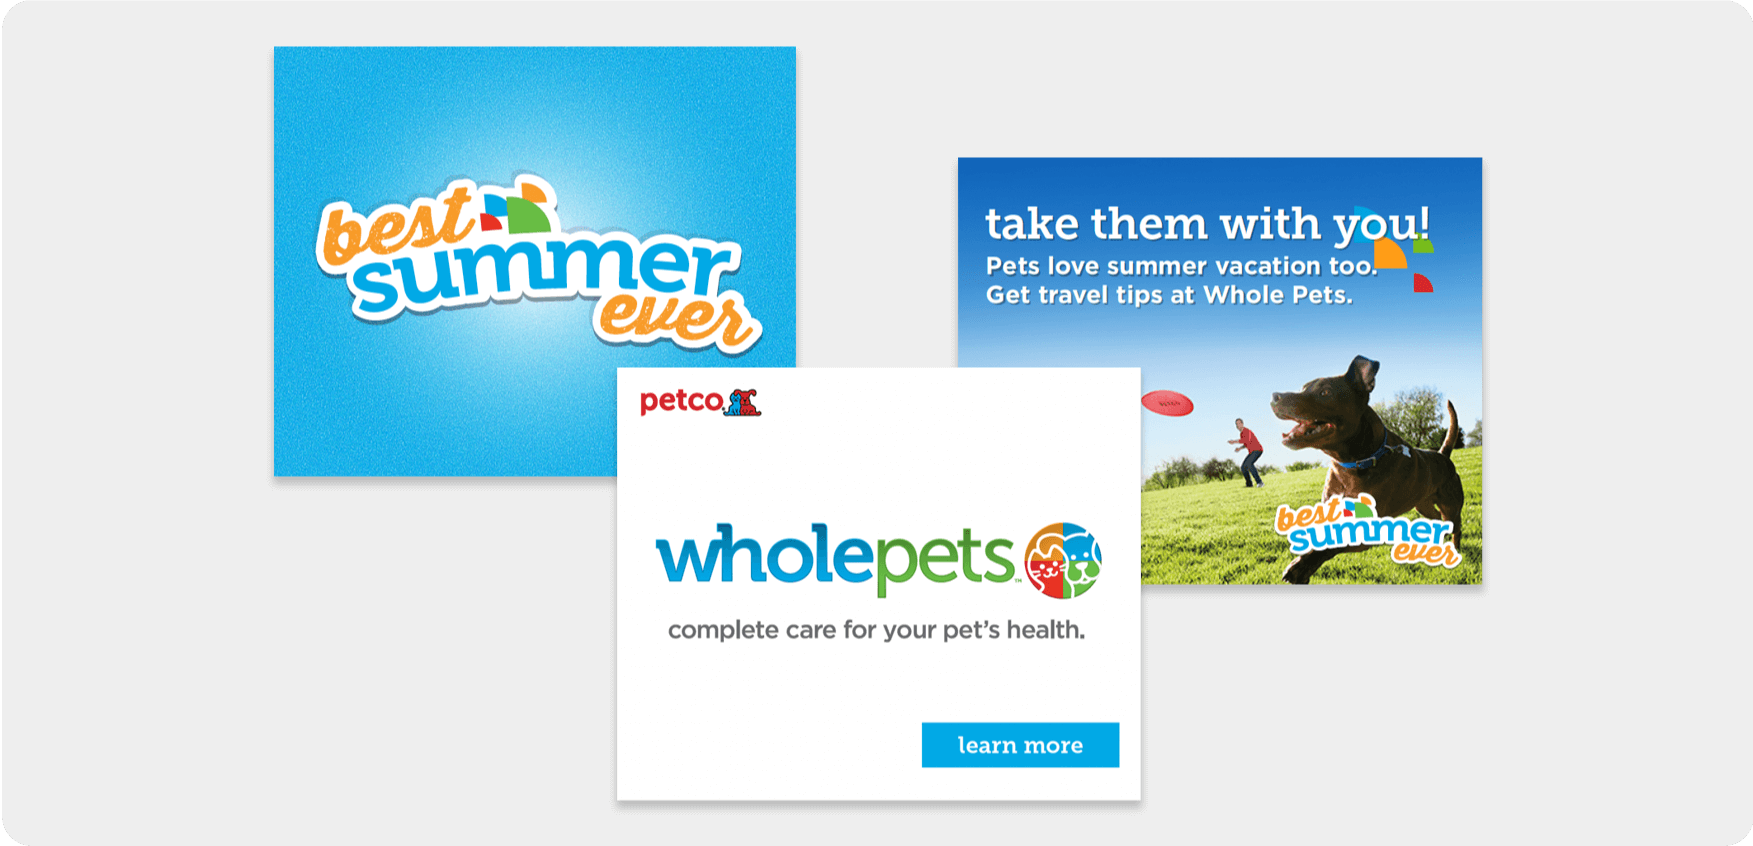 Petco Whole Pets display ad animation stills on gray background